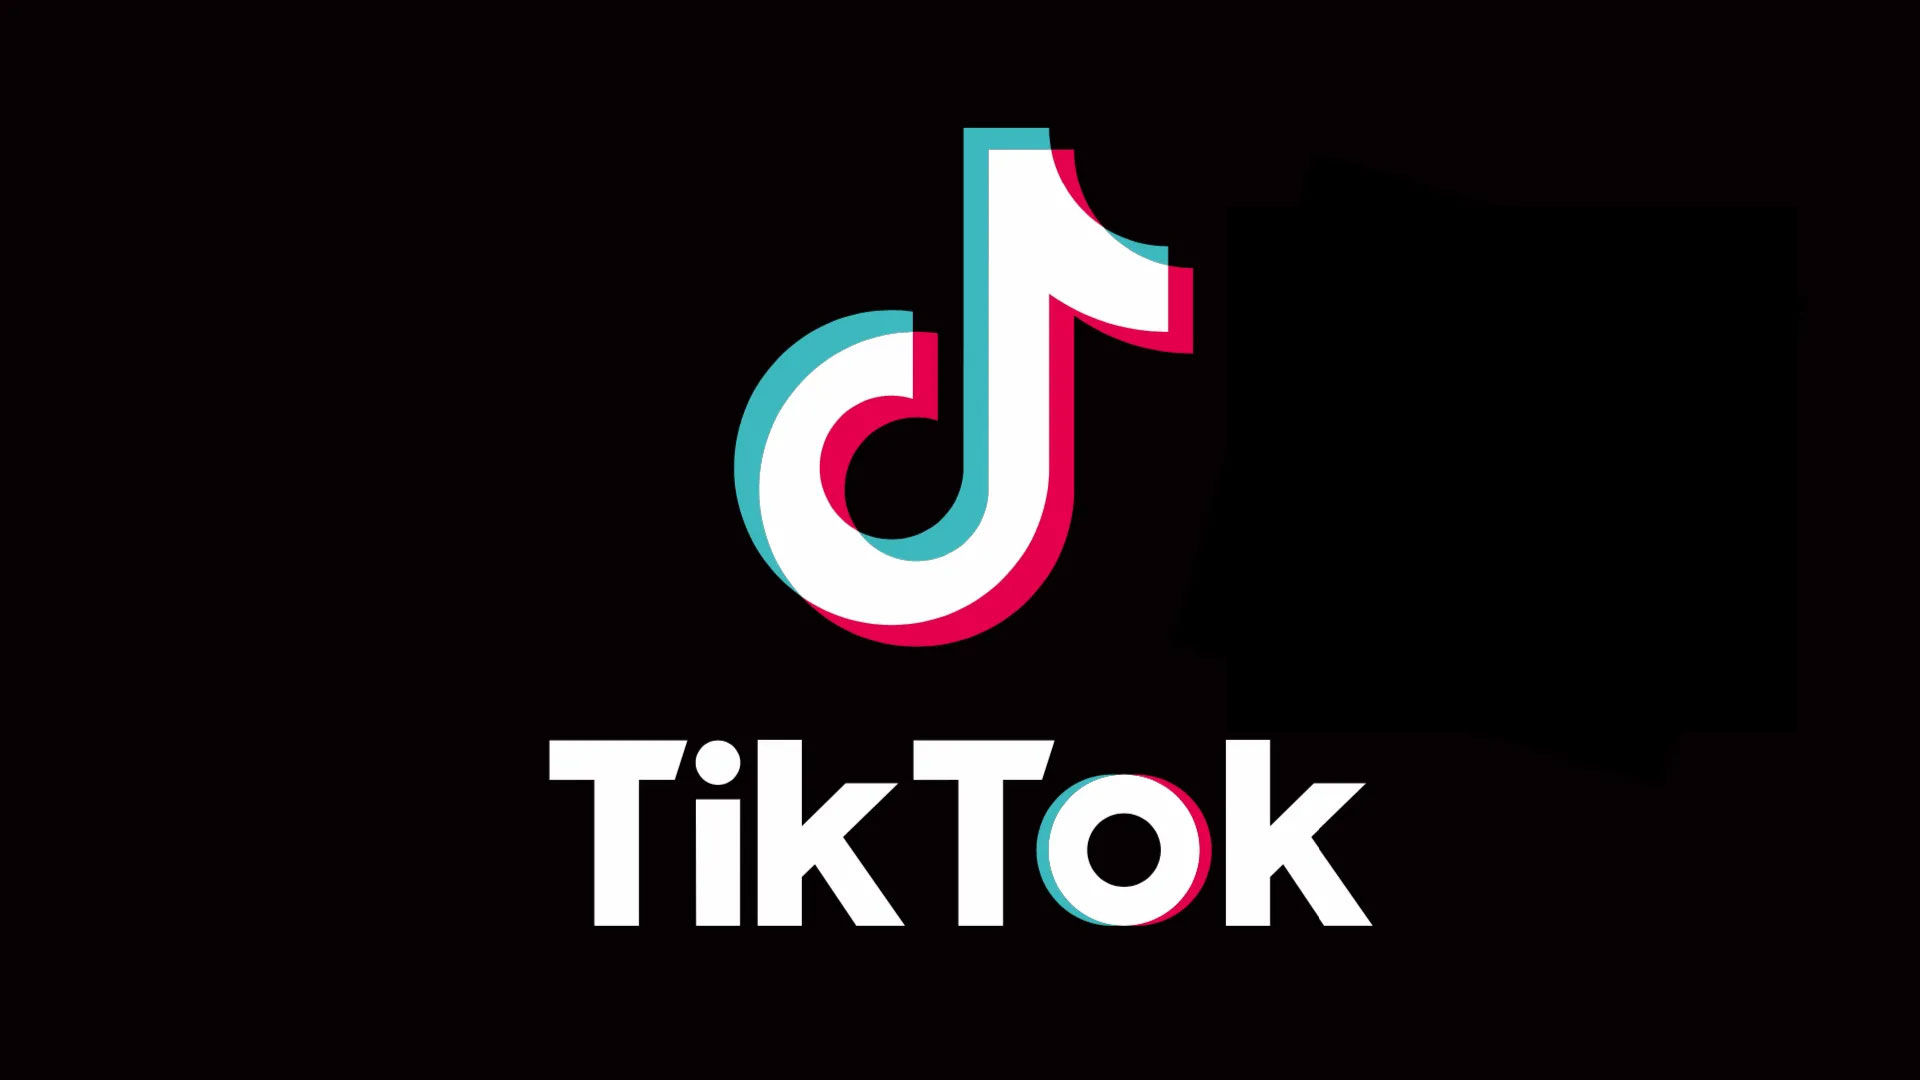 How to Download a TikTok Sound as an MP3